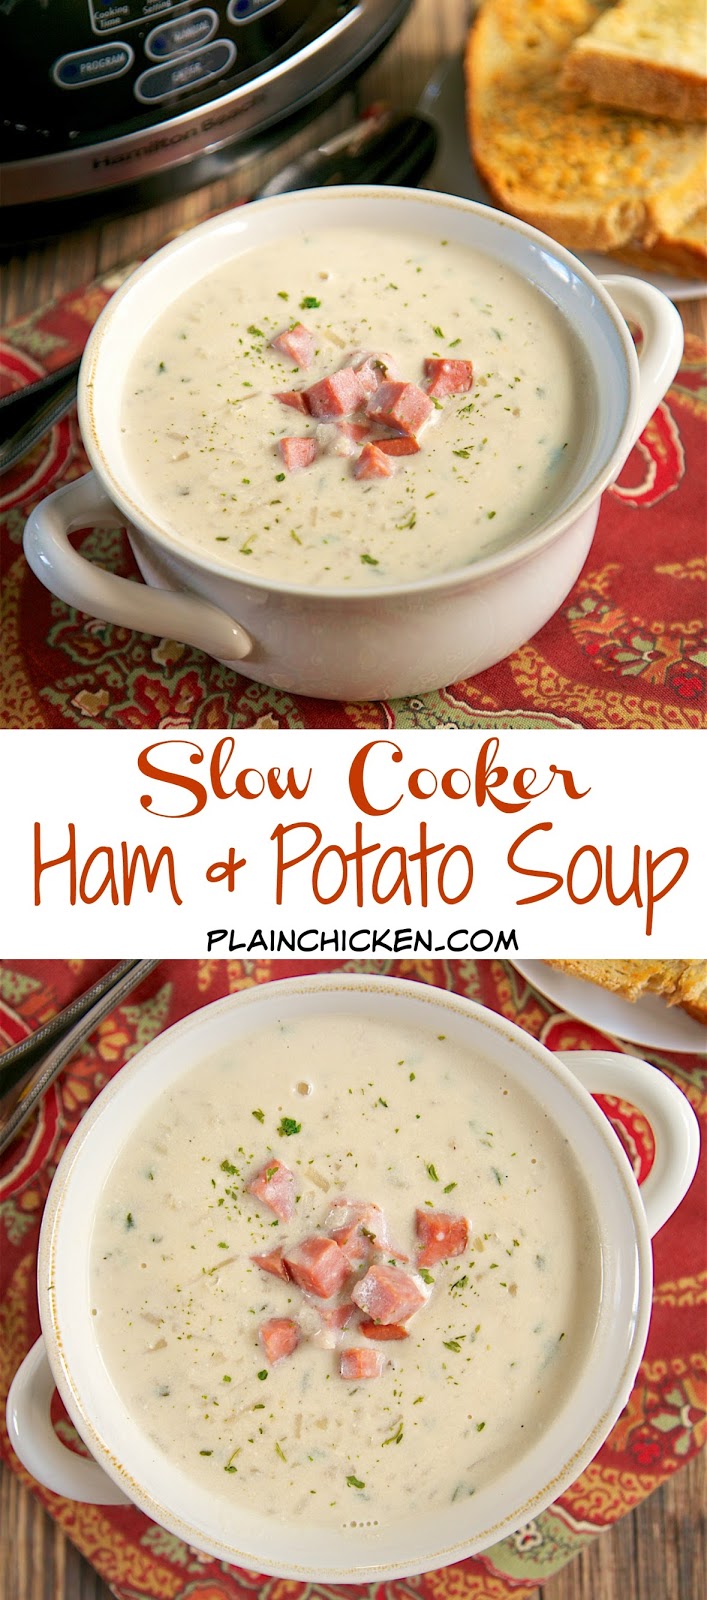 {Slow Cooker} Ham and Potato Soup - frozen hash browns, cream cheese, chicken broth, ham, Worcestershire sauce, onion and garlic - dump everything in the slow cooker and let it cook all day. SO good! Serve with some crusty garlic bread for a complete meal! Easy and delicious!